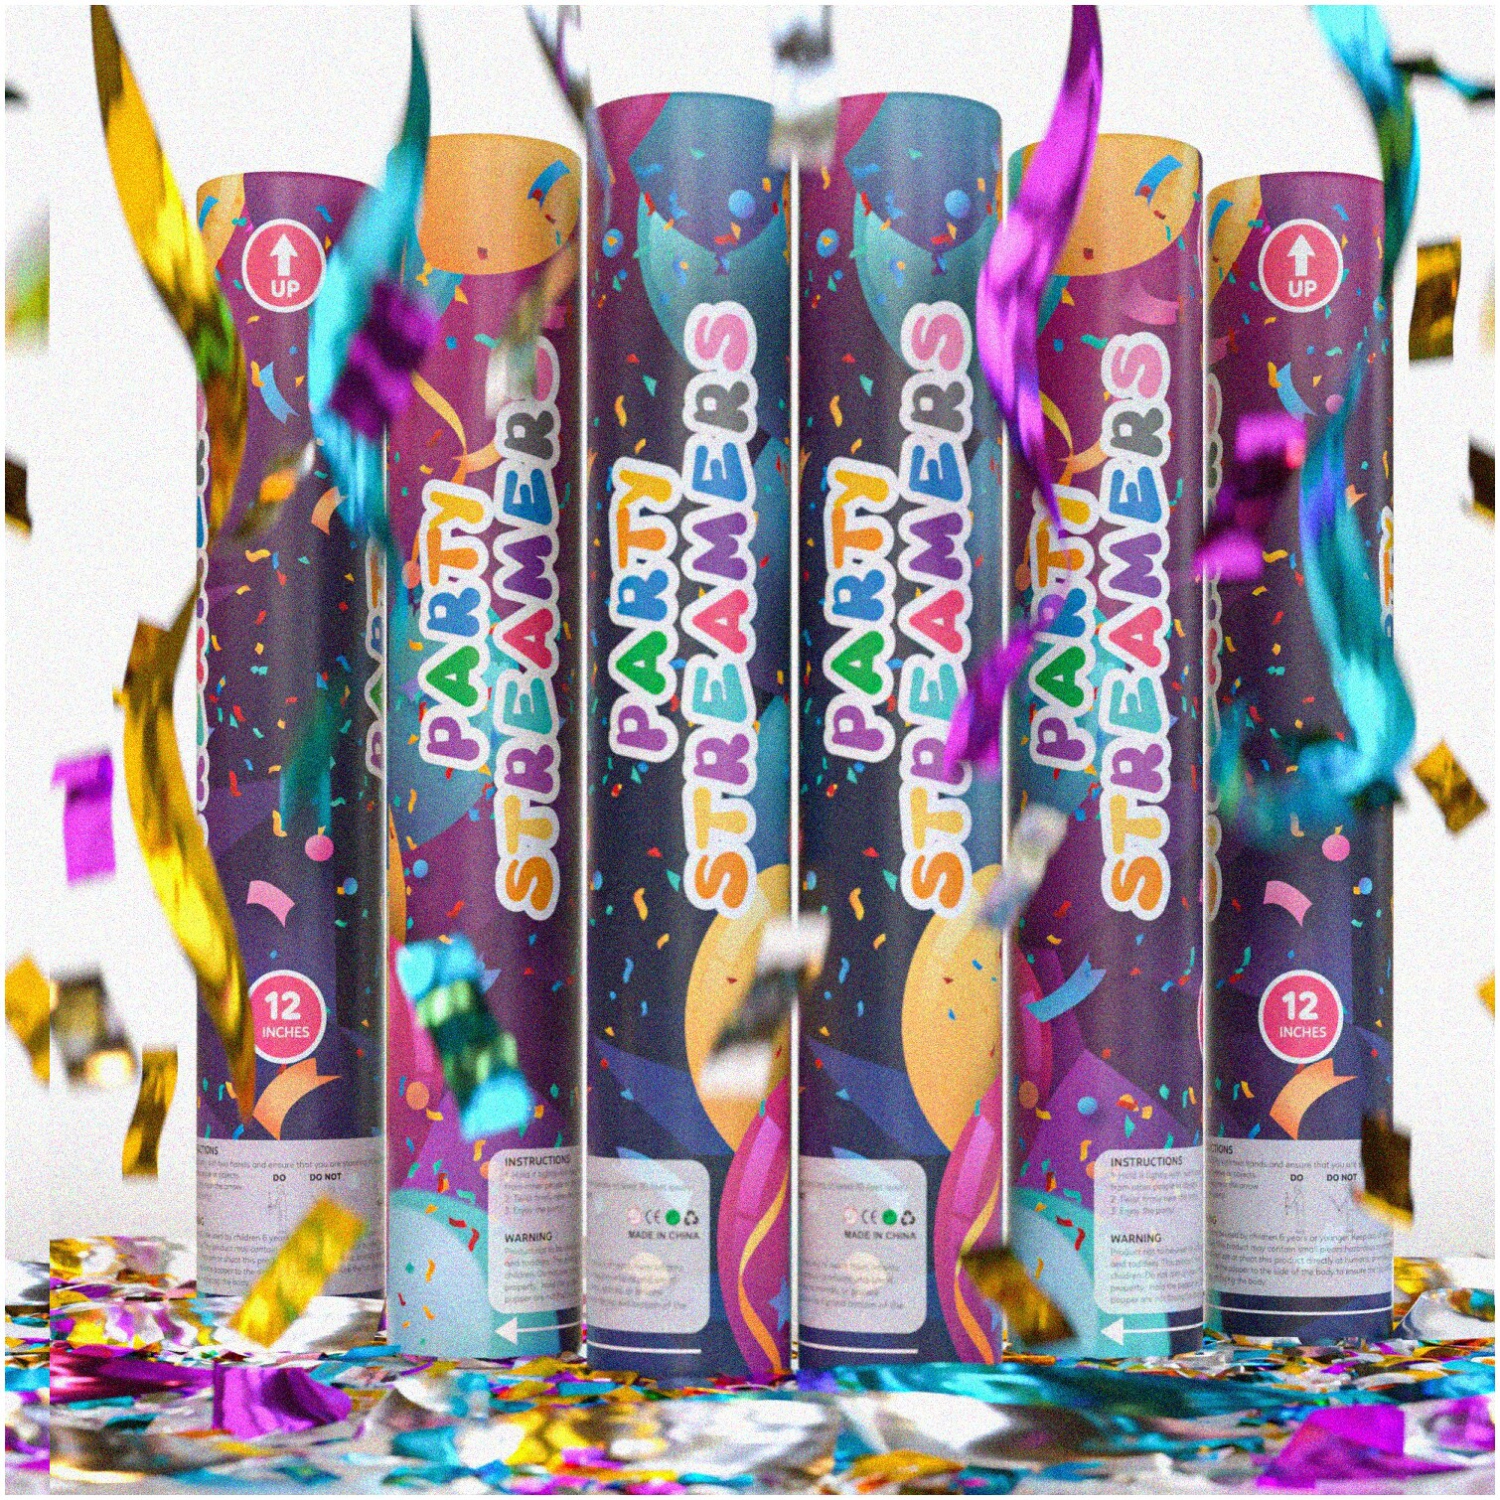 CelebrateXpress 6 Pack Streamer Confetti Cannon - No MESS, Shiny Multicolor Streamers - Launches Up to 25ft! Perfect for Graduation, Birthdays, Weddings - Giant 12in Poppers